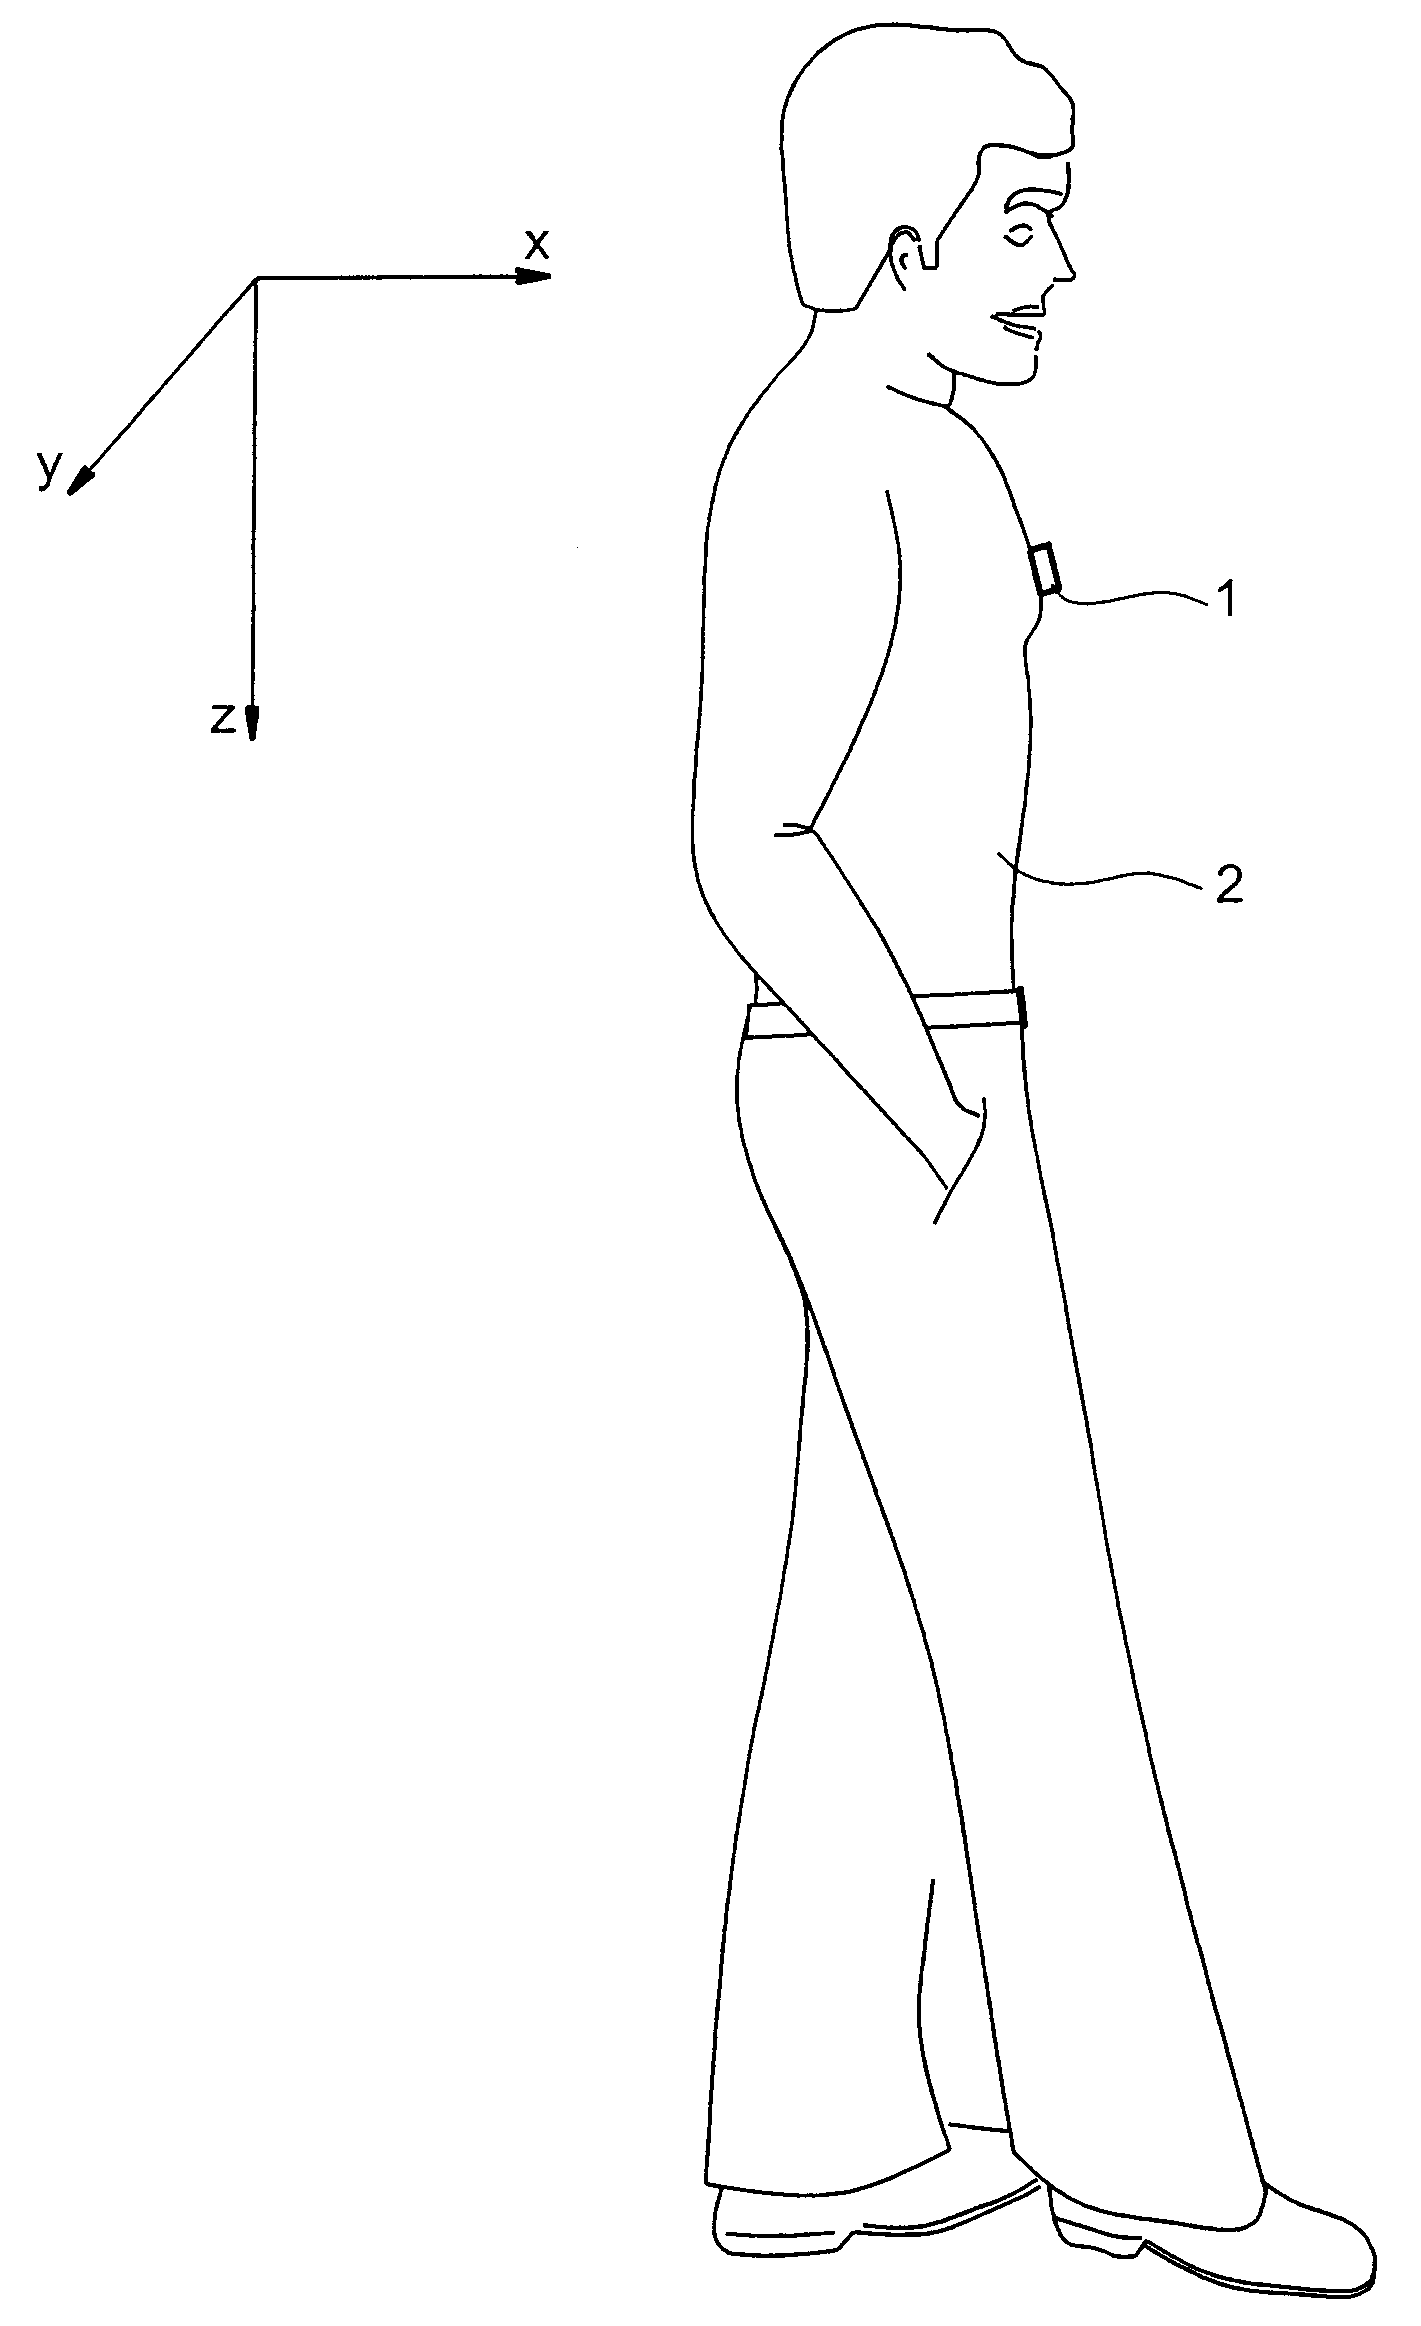 Method for measuring movements of a person wearing a portable detector